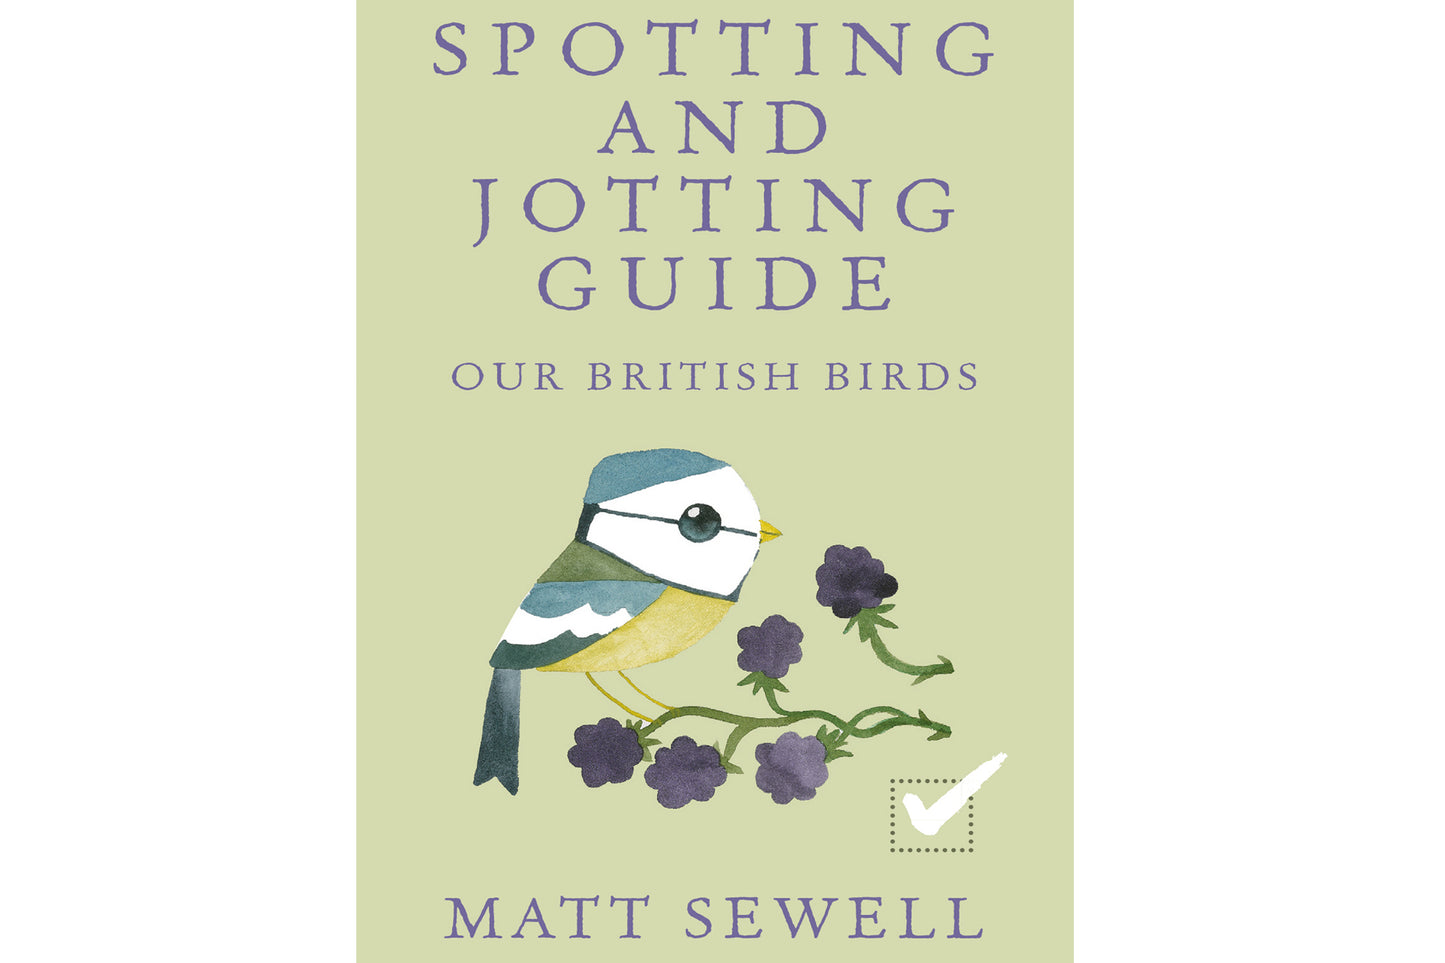 Spotting and Jotting Guide - Our British Birds